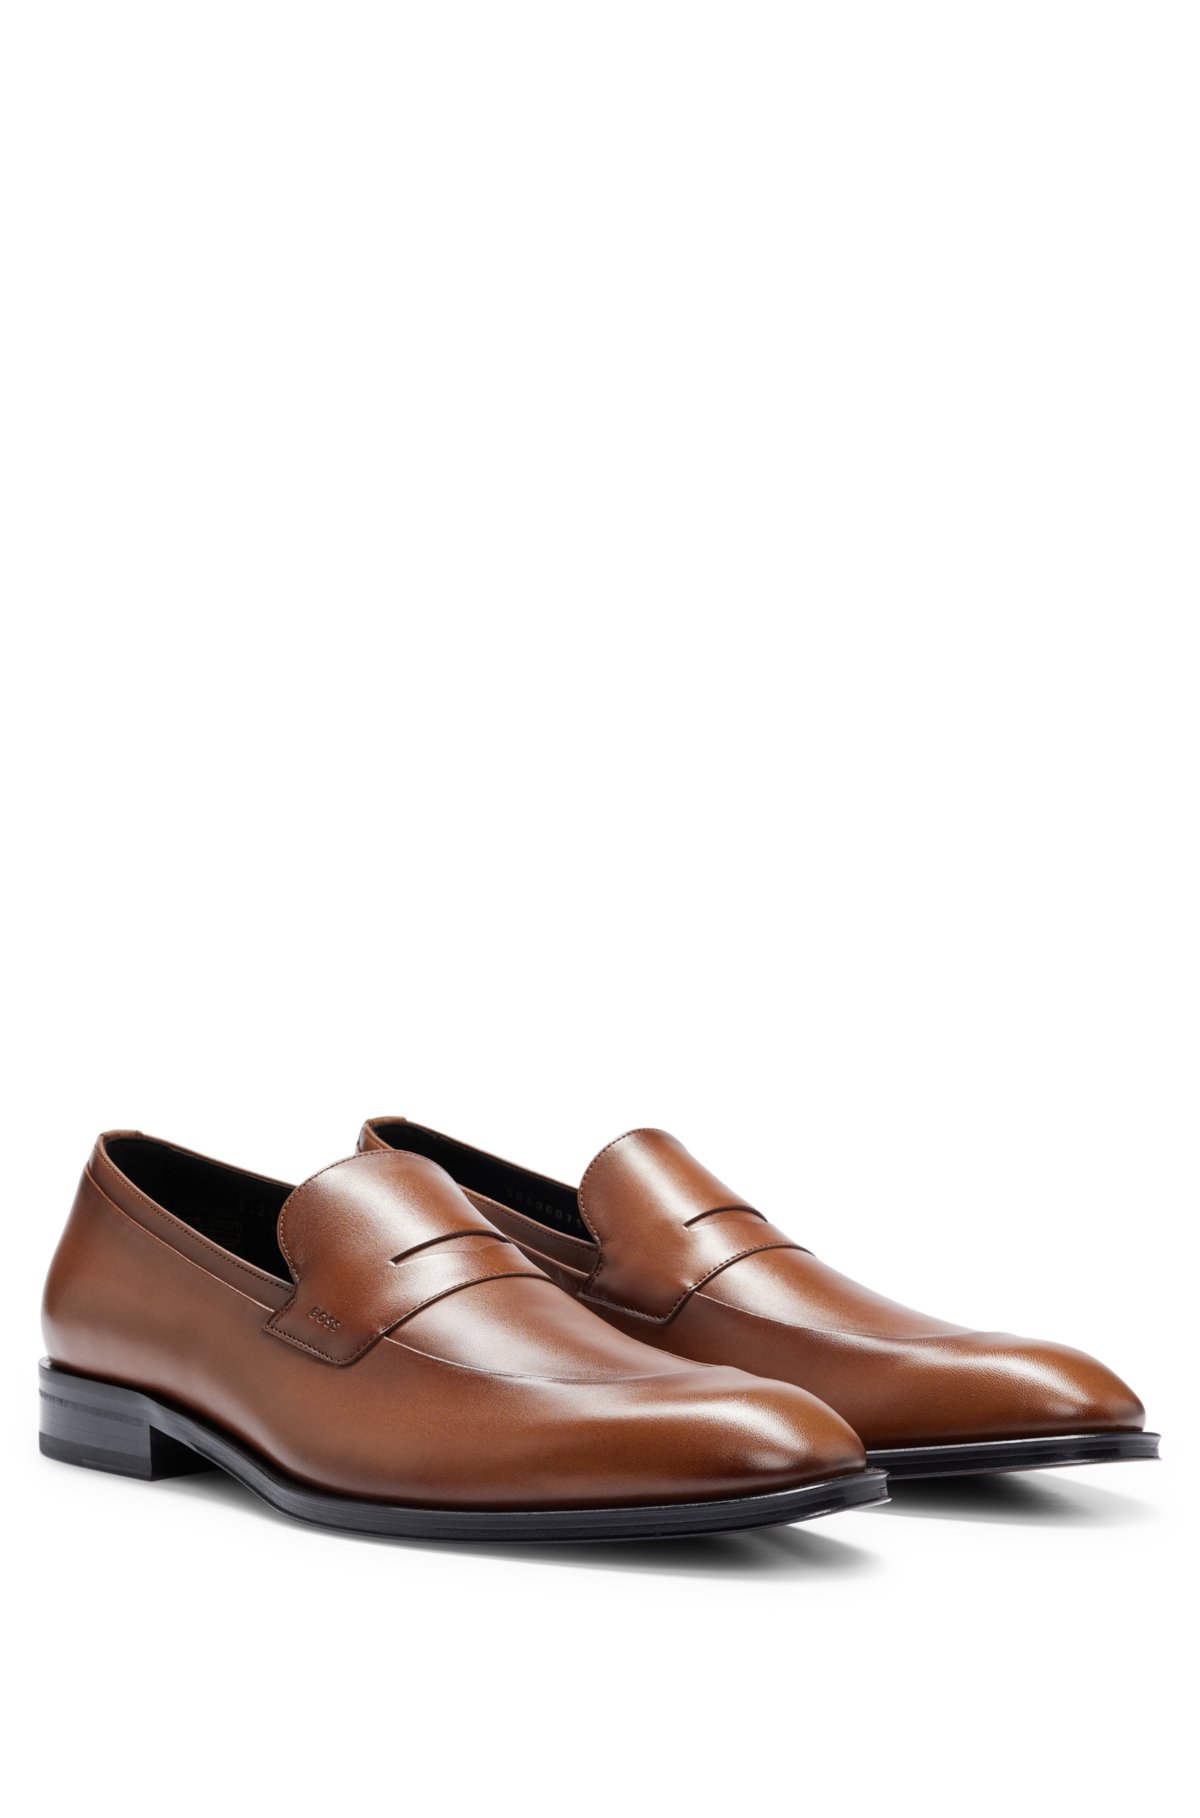 - Italian leather loafers with toe and branded